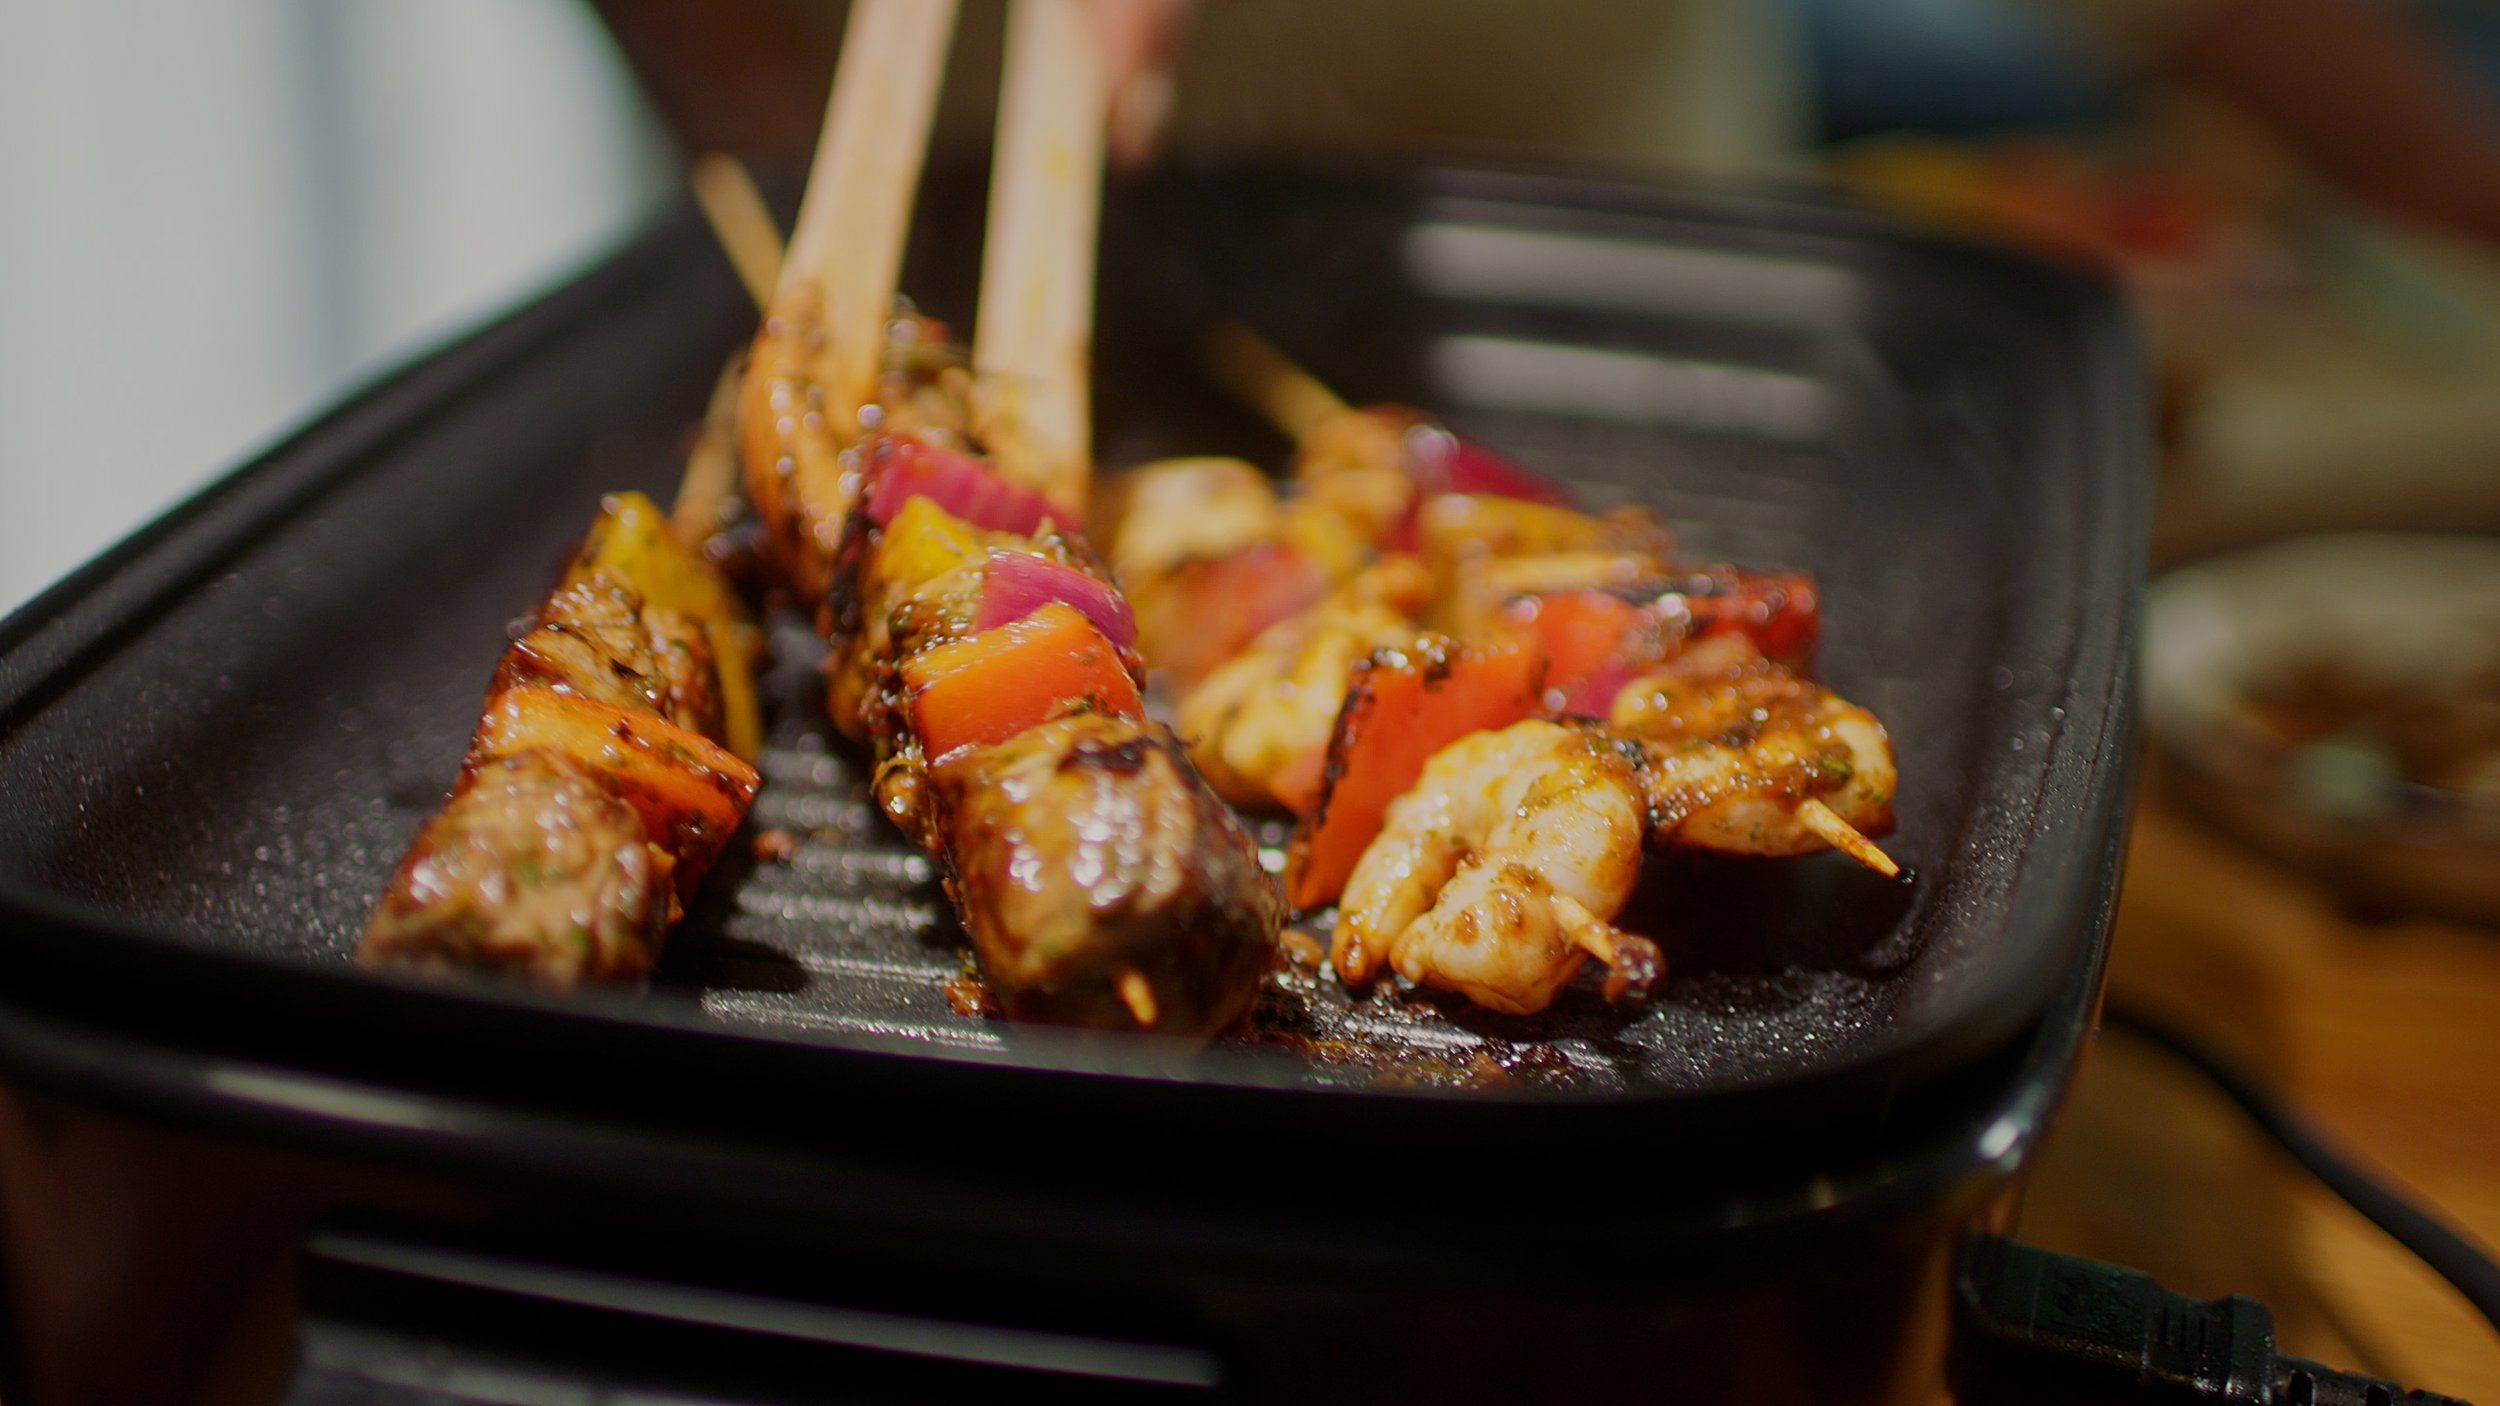  Lamb and pepper skewers sizzling away on the Cook In 